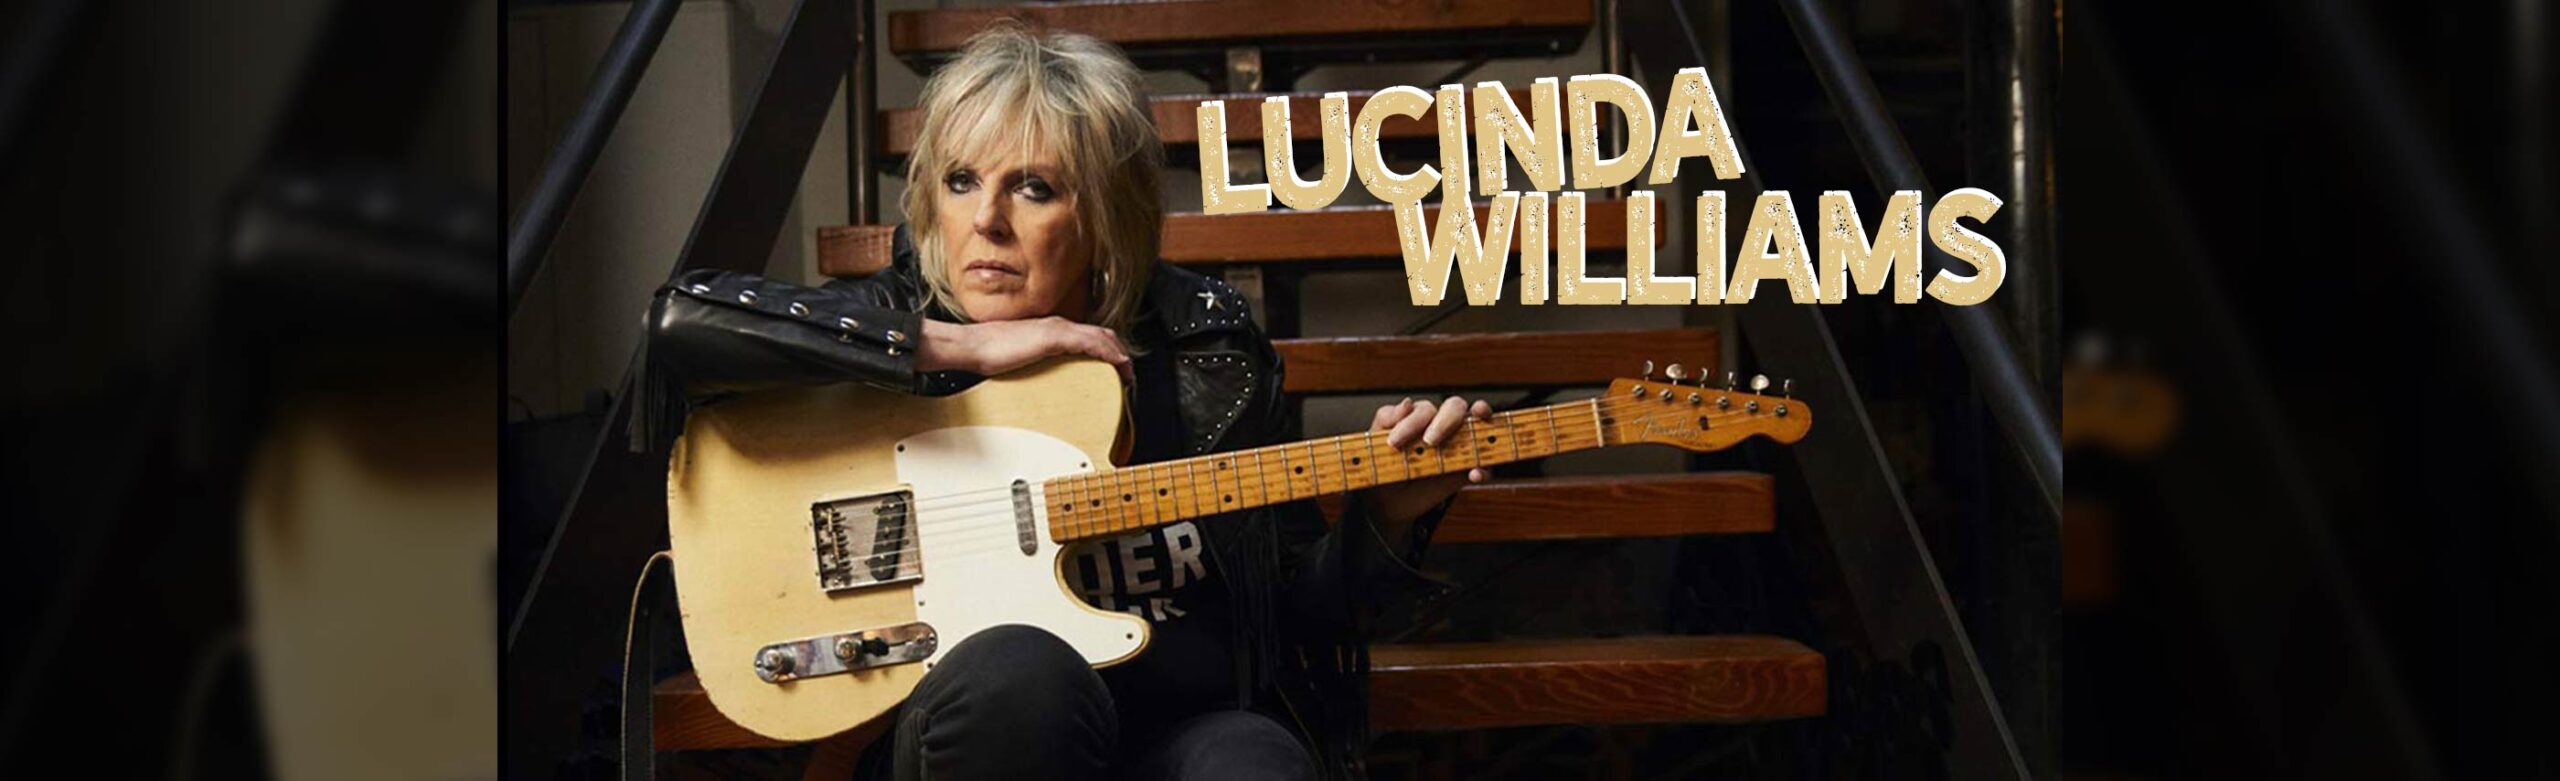 Lucinda Williams Announces Concerts in Missoula and Bozeman Image